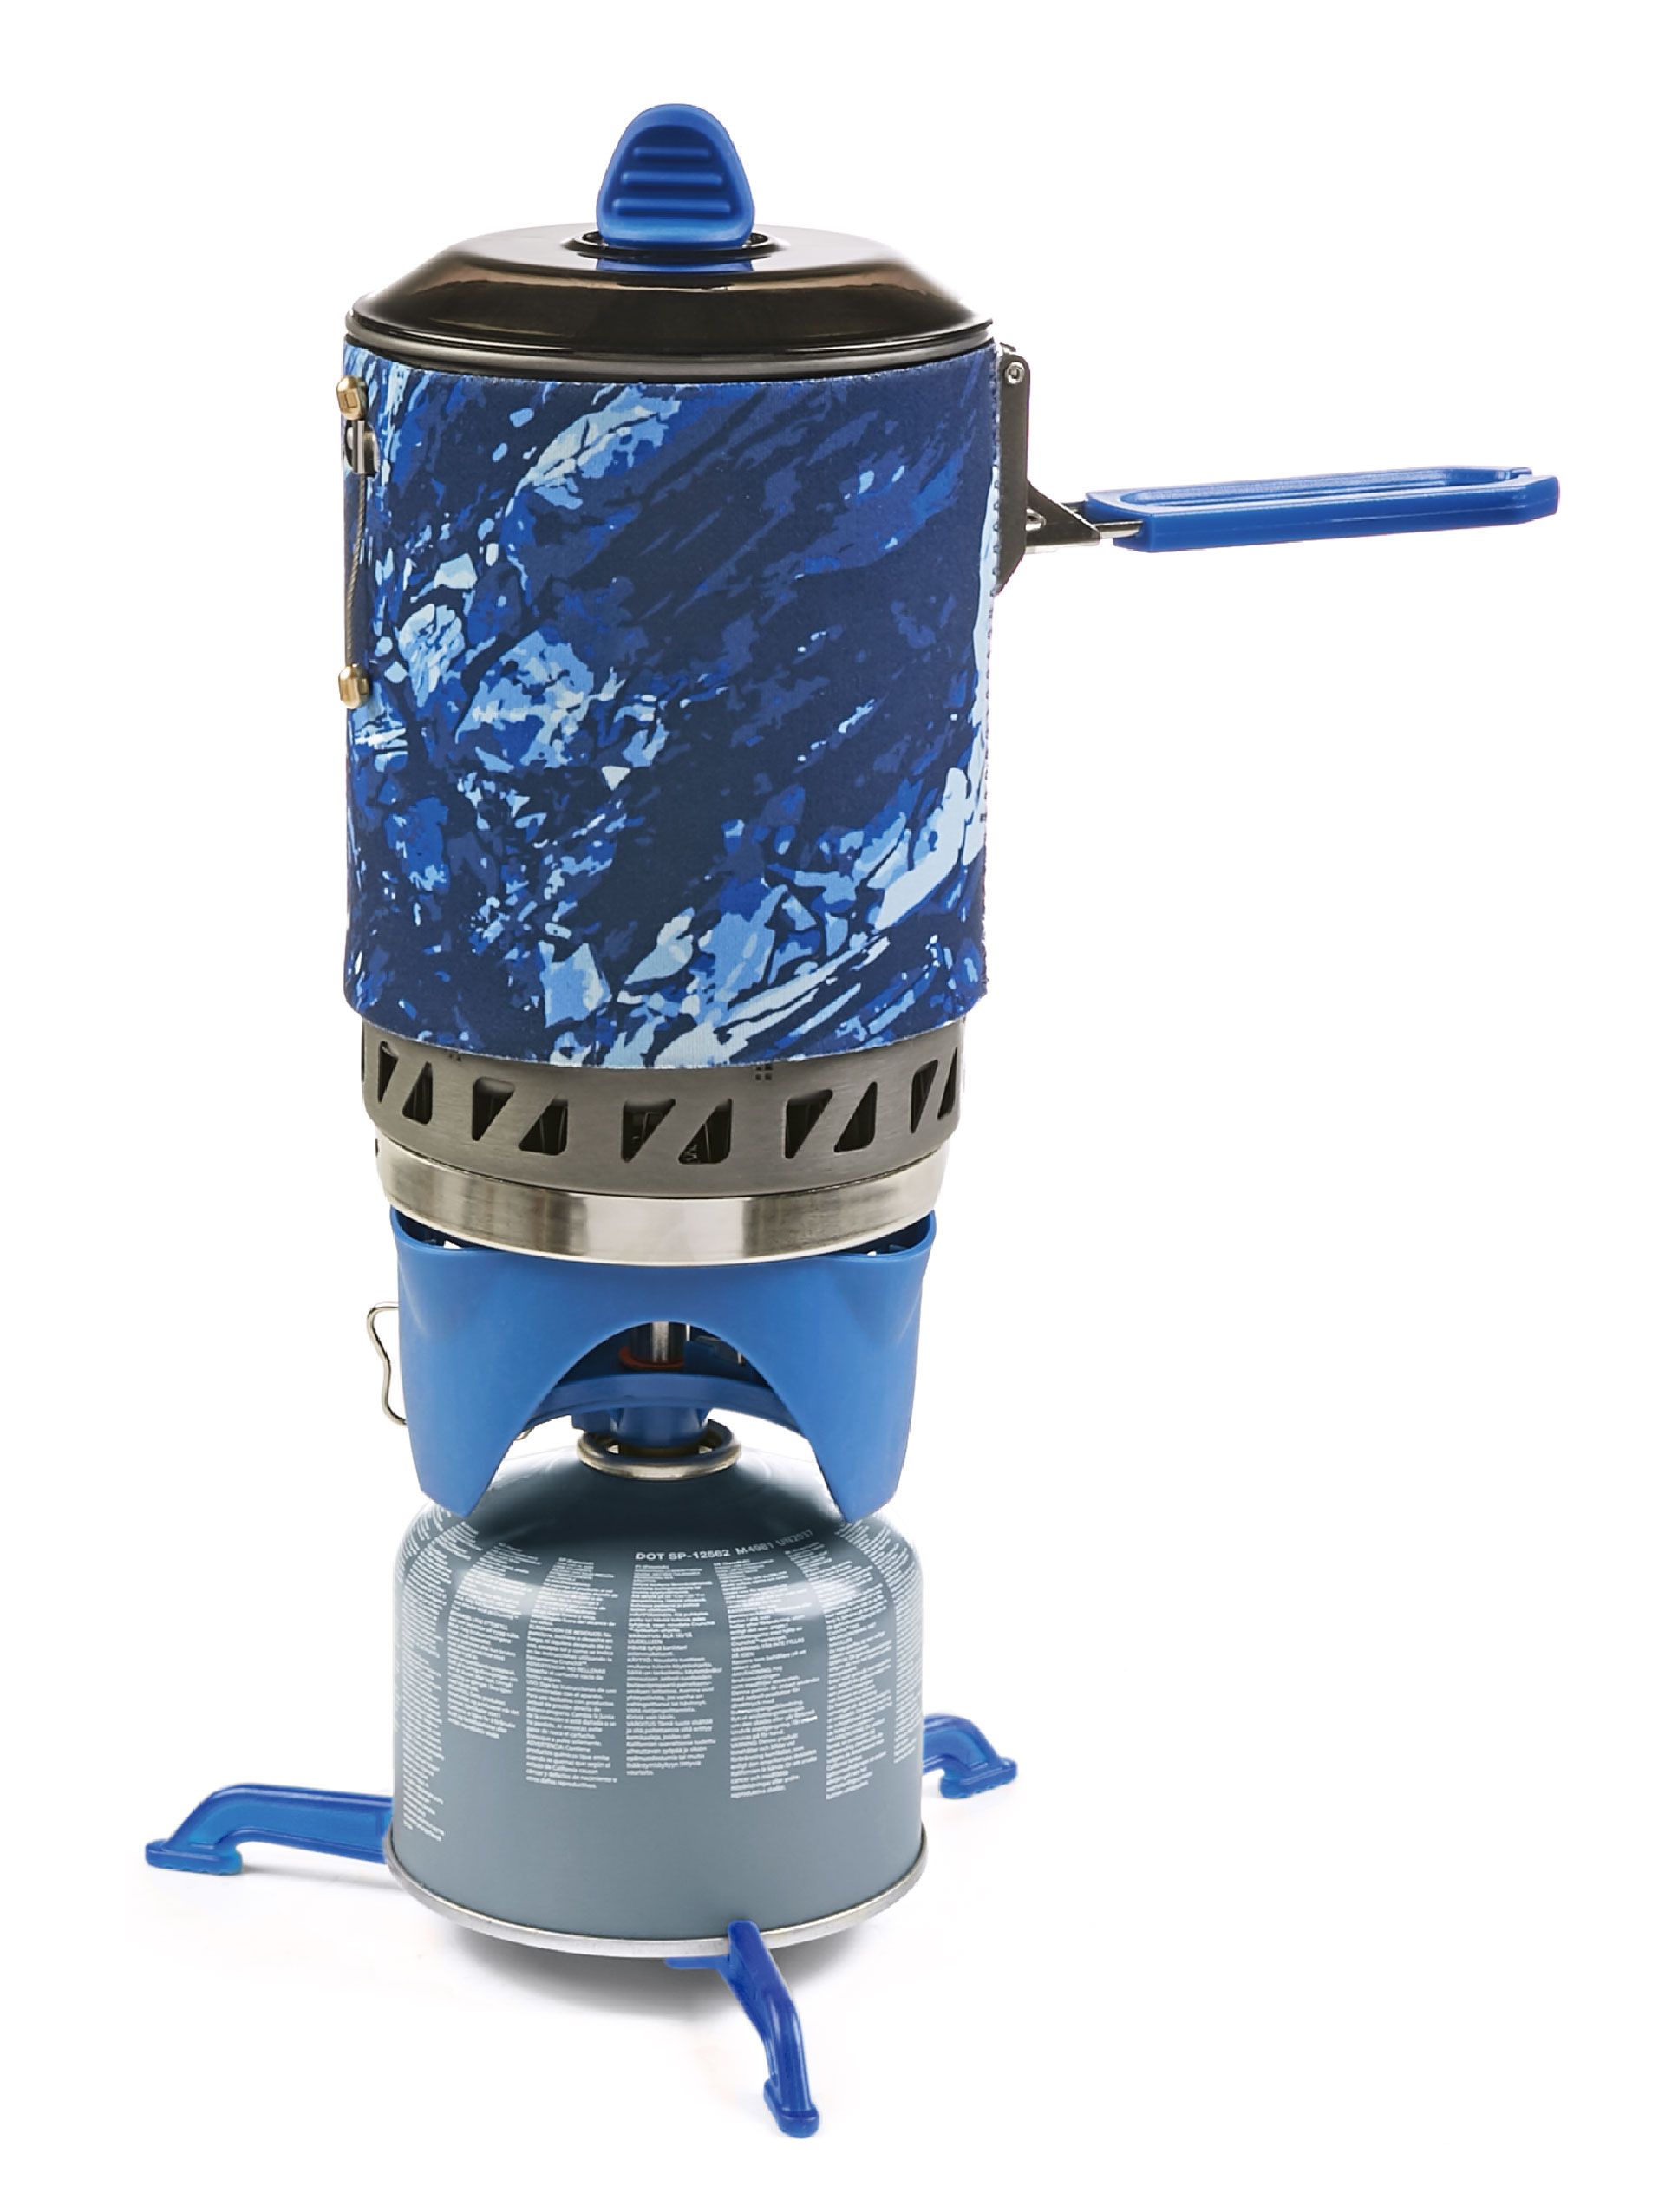 LITHIC All-In-One Backpacking Stove - image 1 of 12